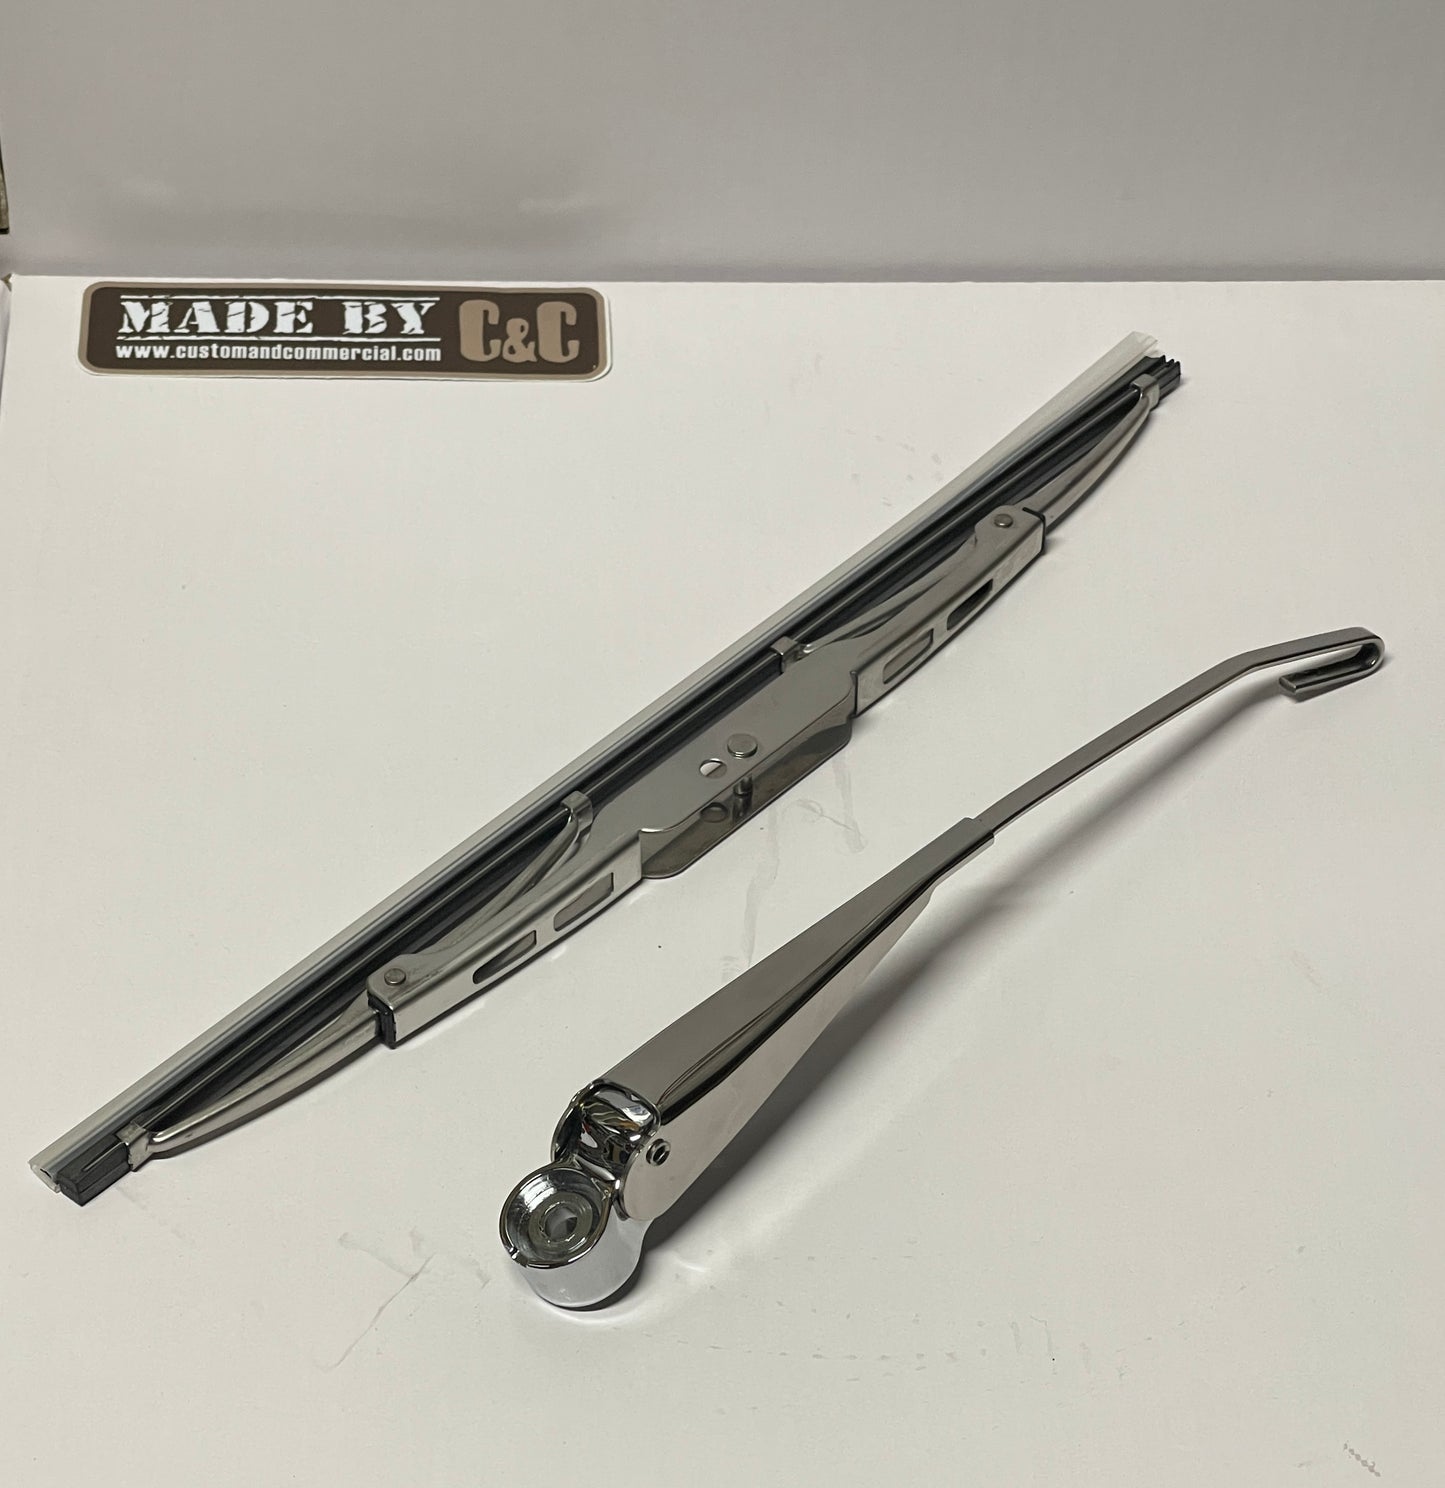 Wiper Arms And Blades Plastic Cap Style Ghia Chromed - 73-74